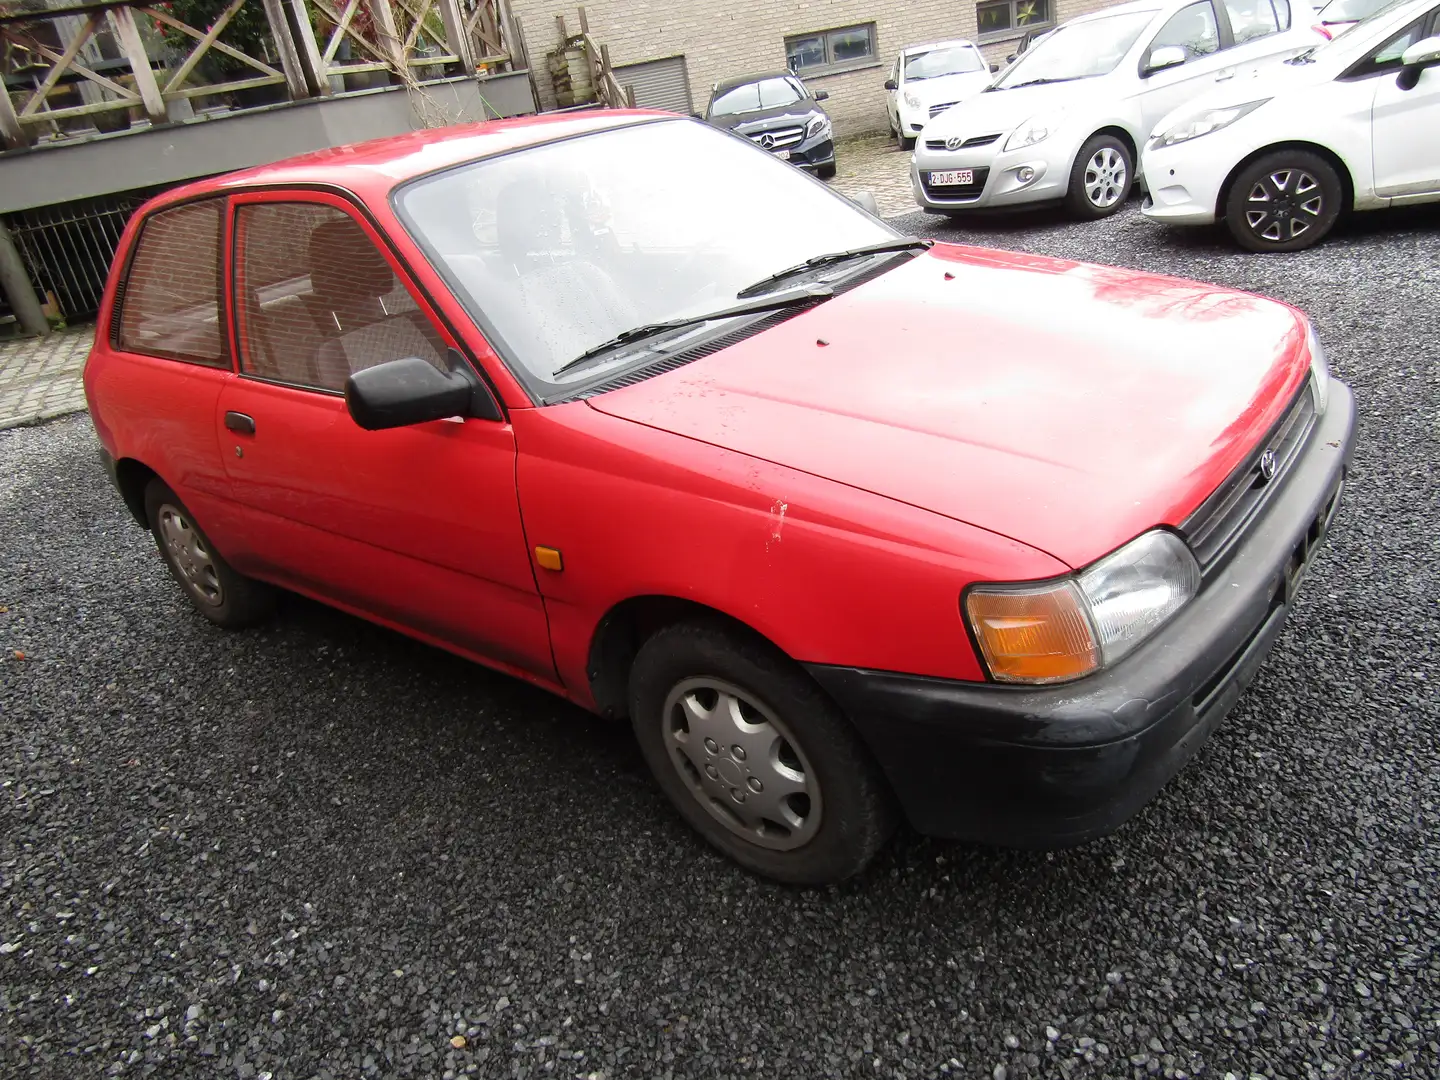 Toyota Starlet 1.0i (immatriculation ancêtre possible) 32 ans Rouge - 1